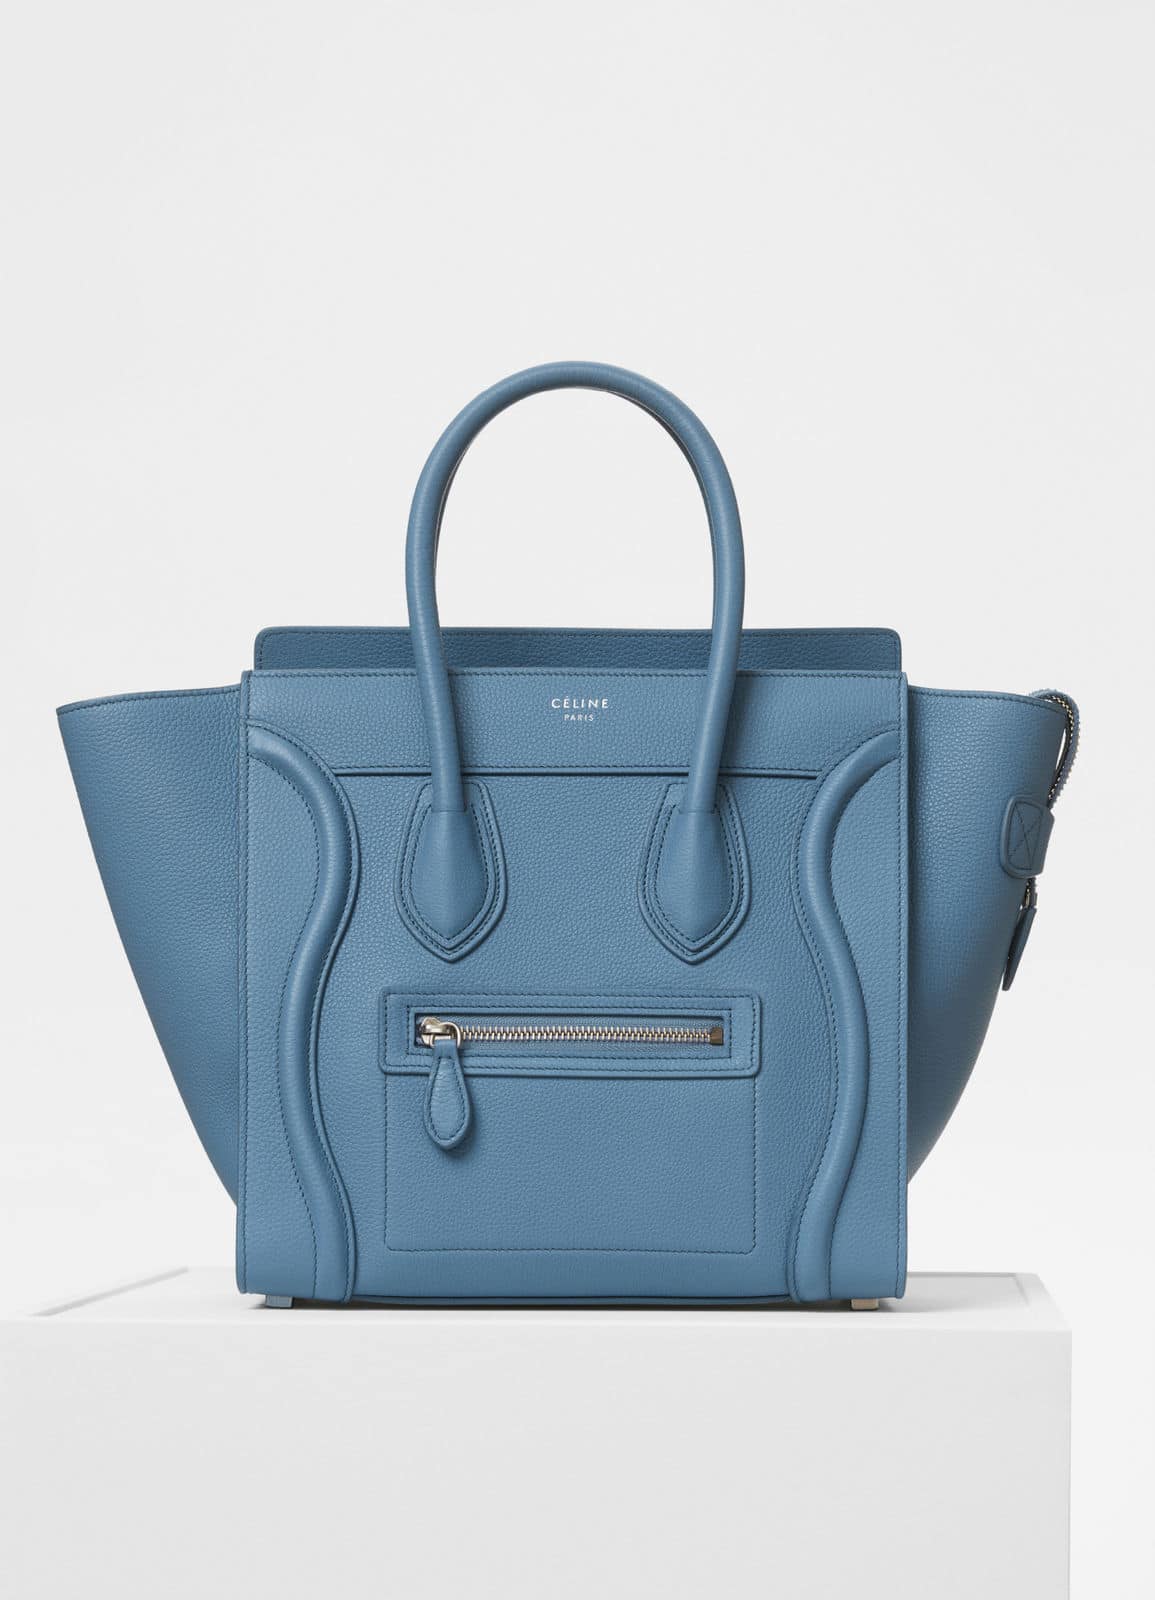 Celine Spring 2018 Bag Collection Featuring the Big Bucket - Spotted ...